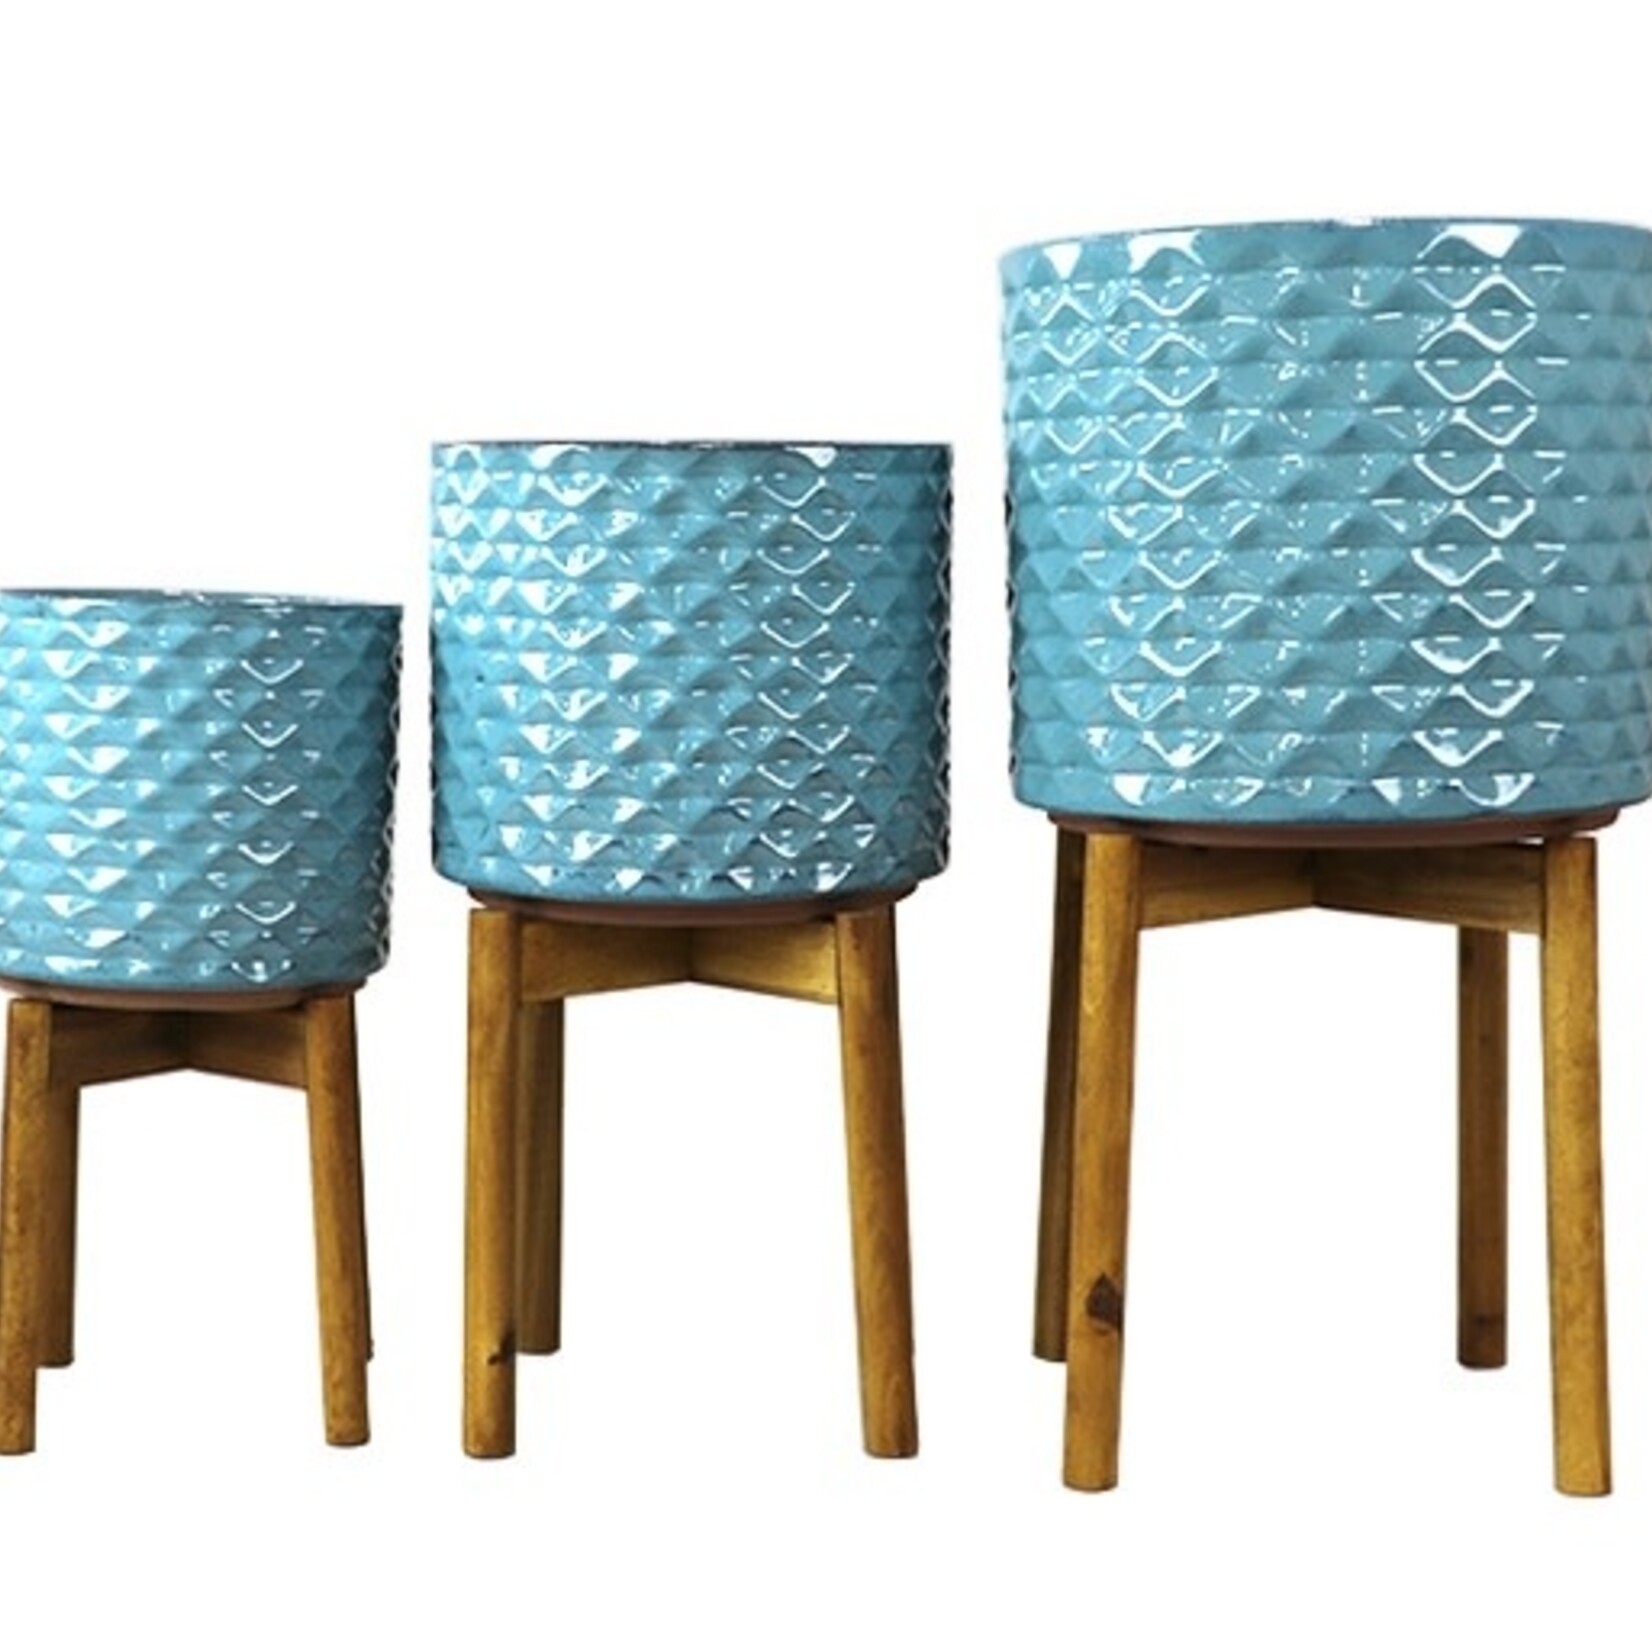 Blue Rae Plant Stands - Med. Turquoise